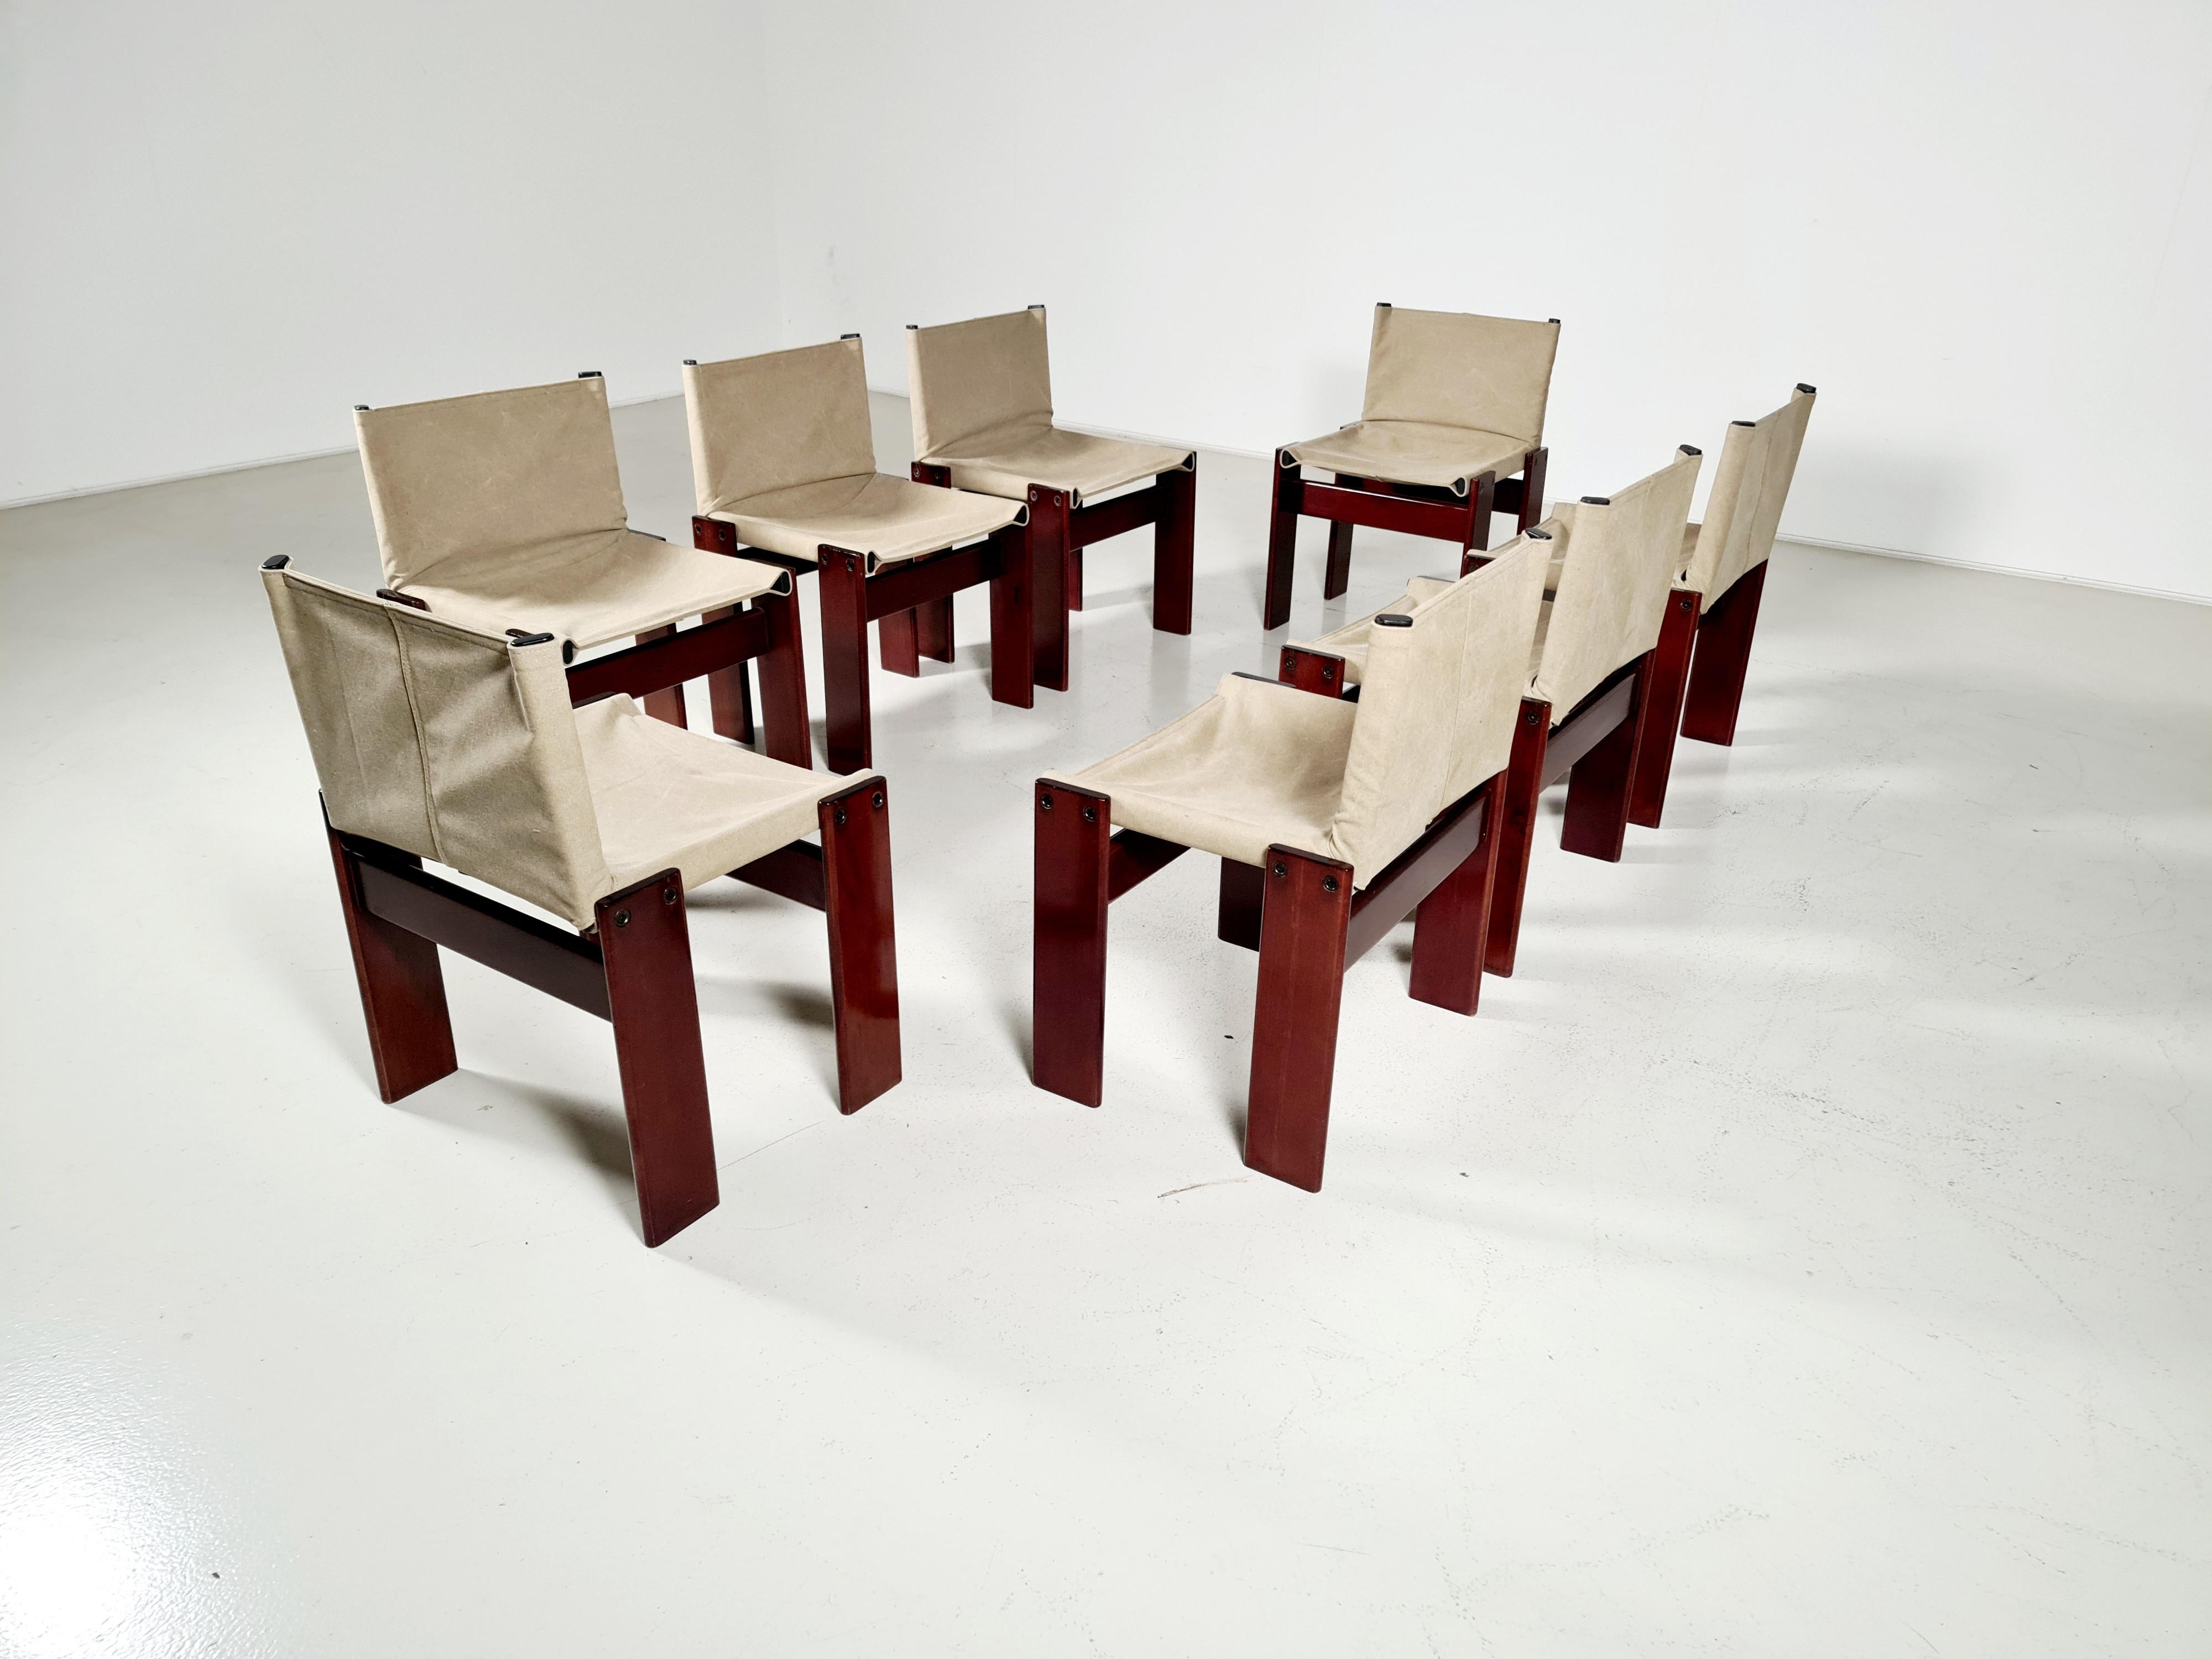 A set of 8 mahogany wood and canvas dining chairs, model Monk, for Molteni, Italy, 1970s.

The new canvas forms a beautiful combination with the wood. An interesting and high-quality chair. Simple and solid design by Italian award-winning designers